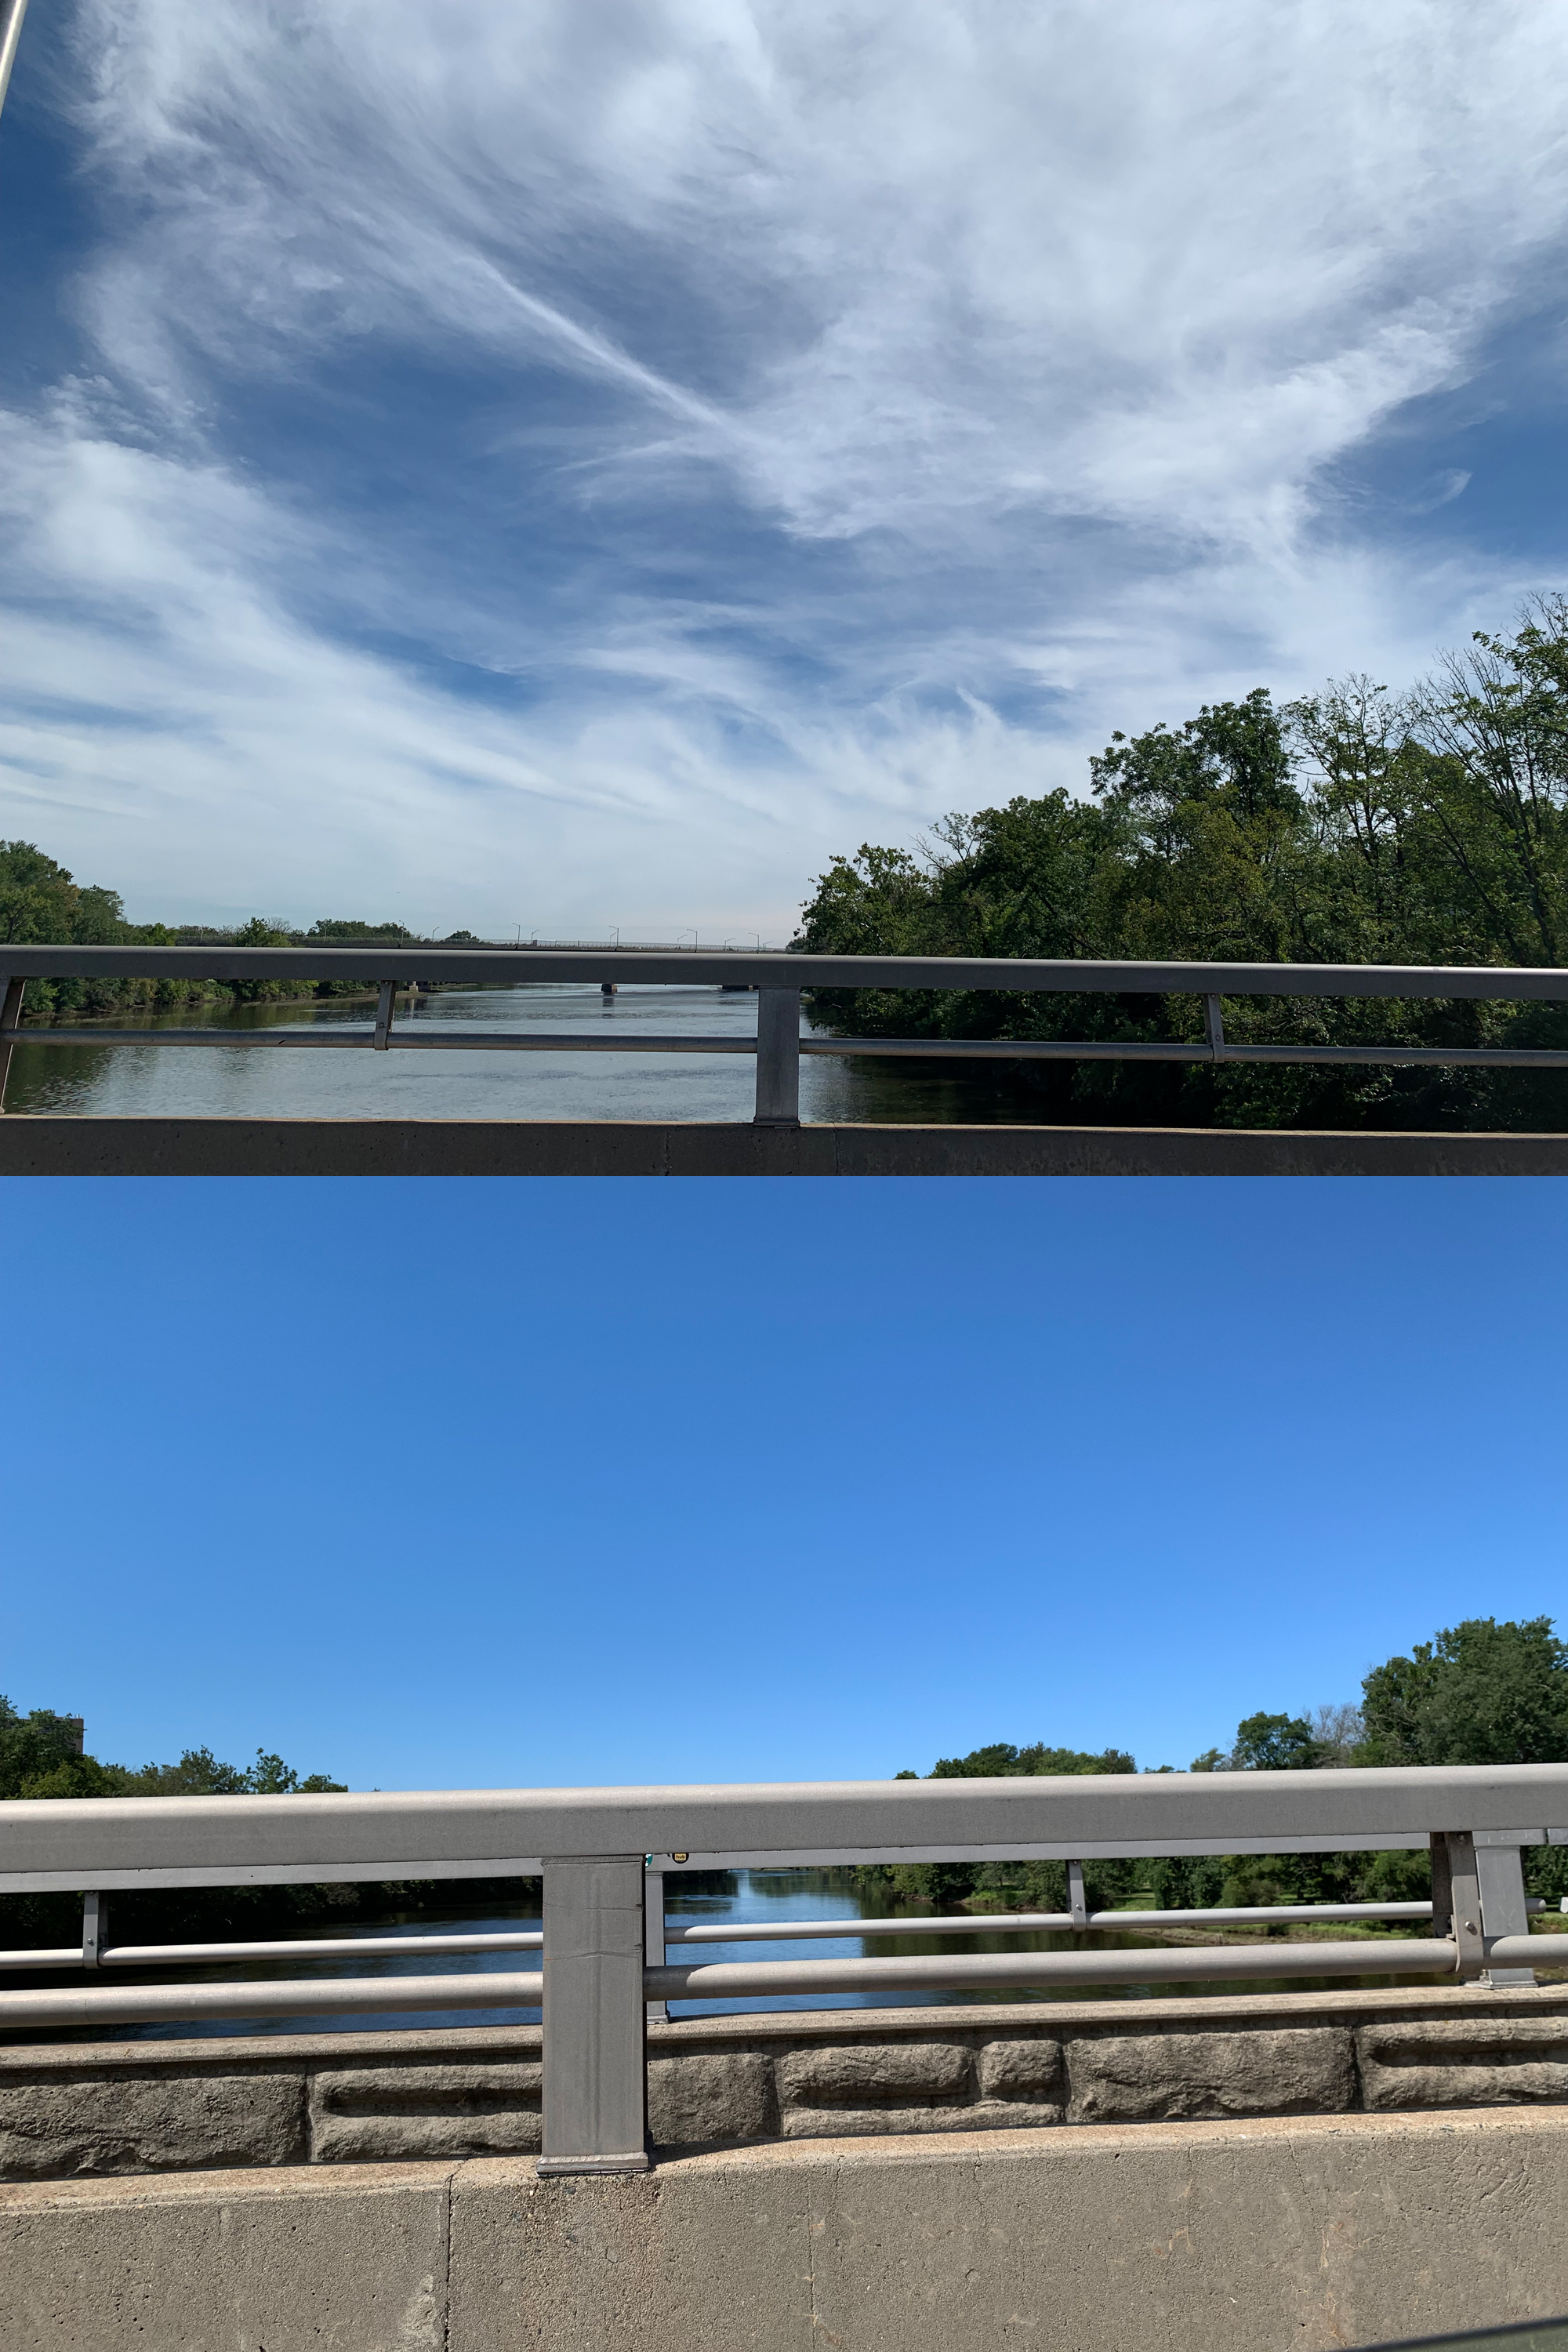 Top: Cirrus cloud cover from the western periphery of Hurricane Lee looking east from Landing Lane Bridge between Piscataway (Middlesex) and New Brunswick (Middlesex) at 12:30 PM EDT on September 15th. Bottom: Deep blue sky looking west from the bridge at the same time (photos by D. Robinson).